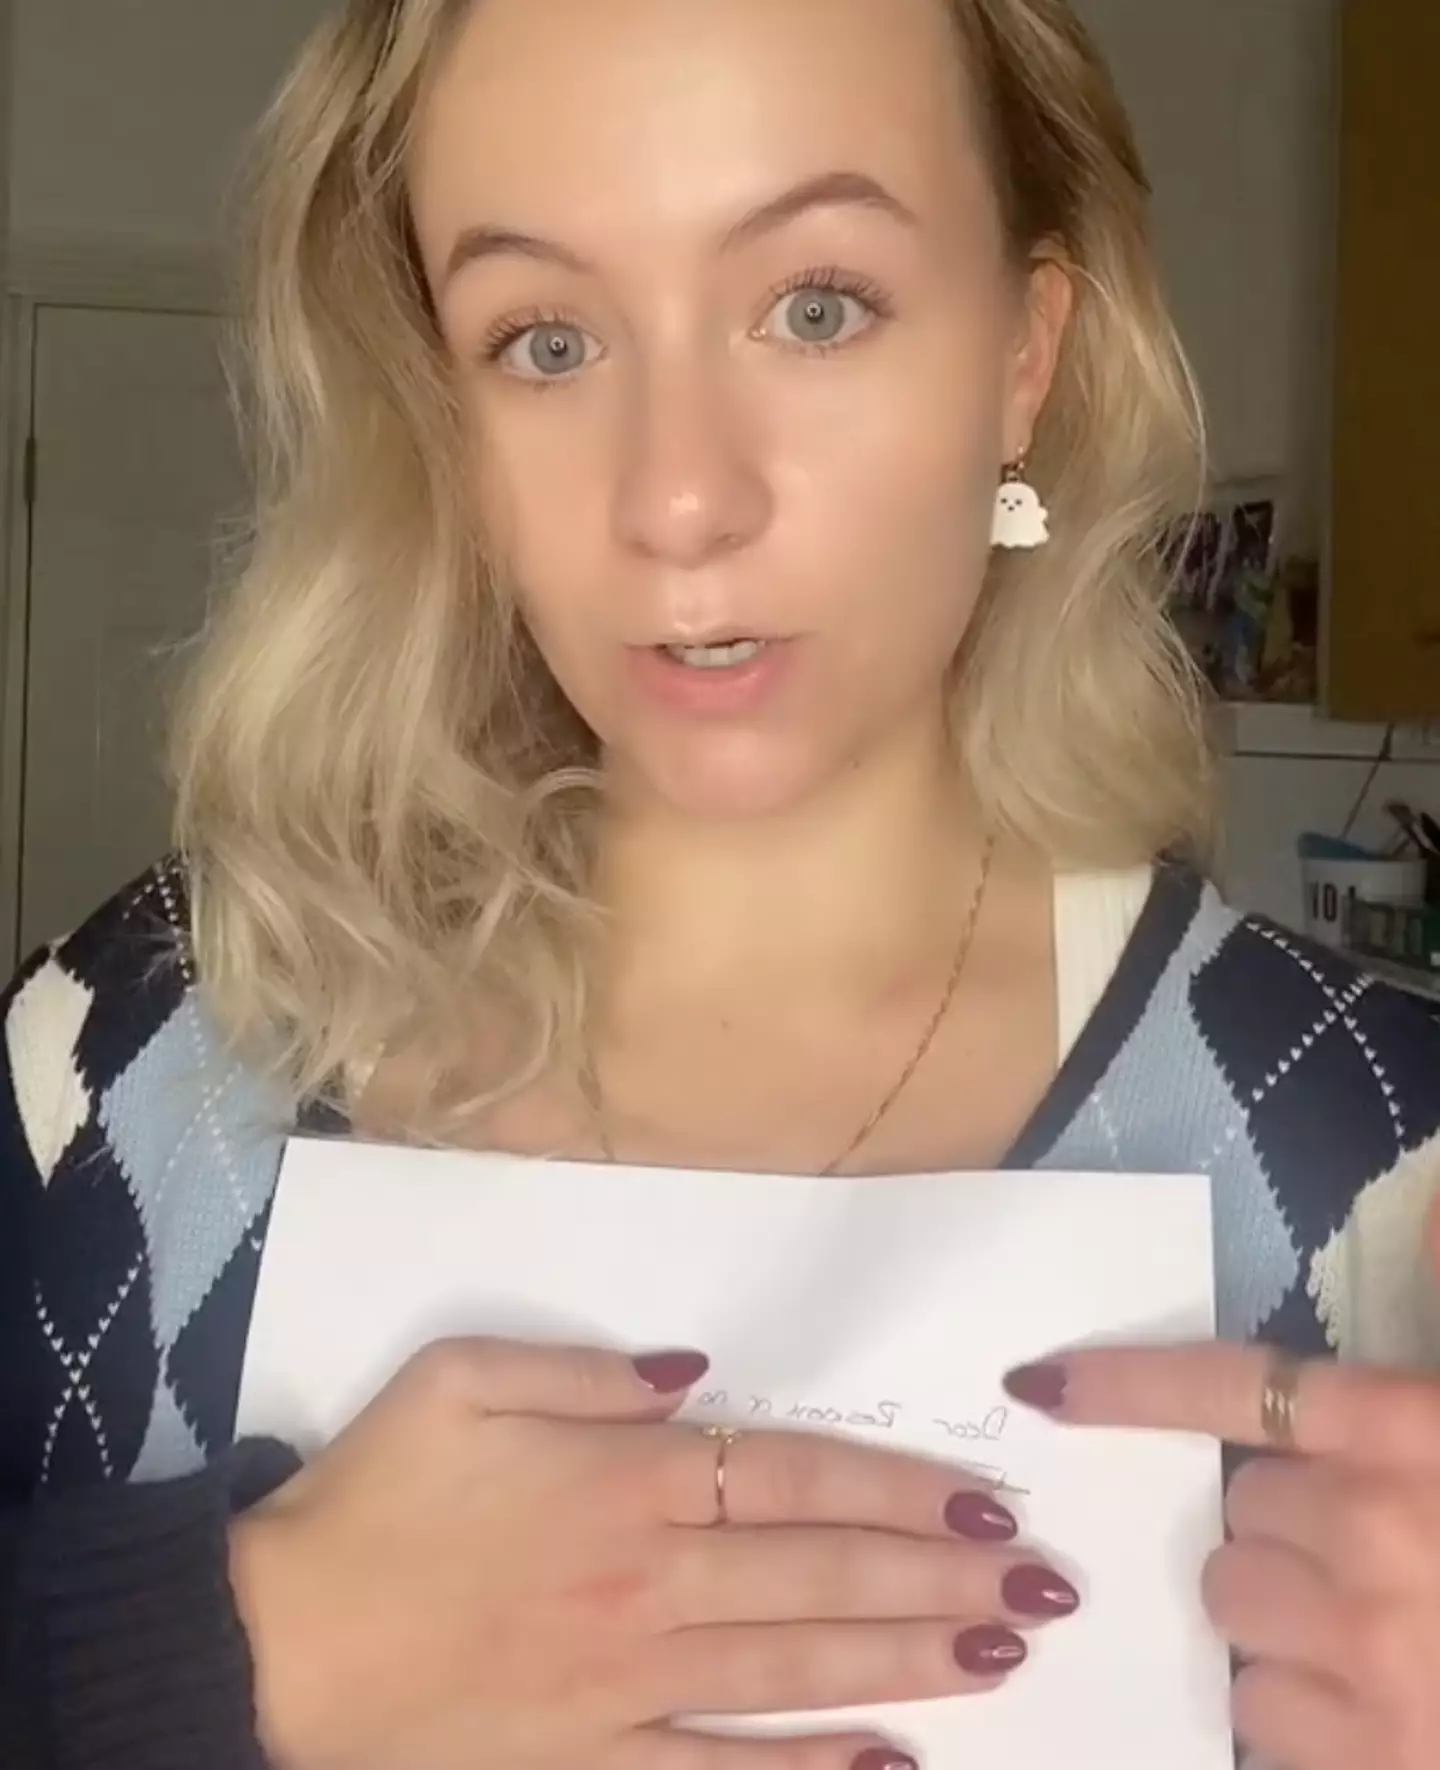 Meg shared the contents of the letter on TikTok.